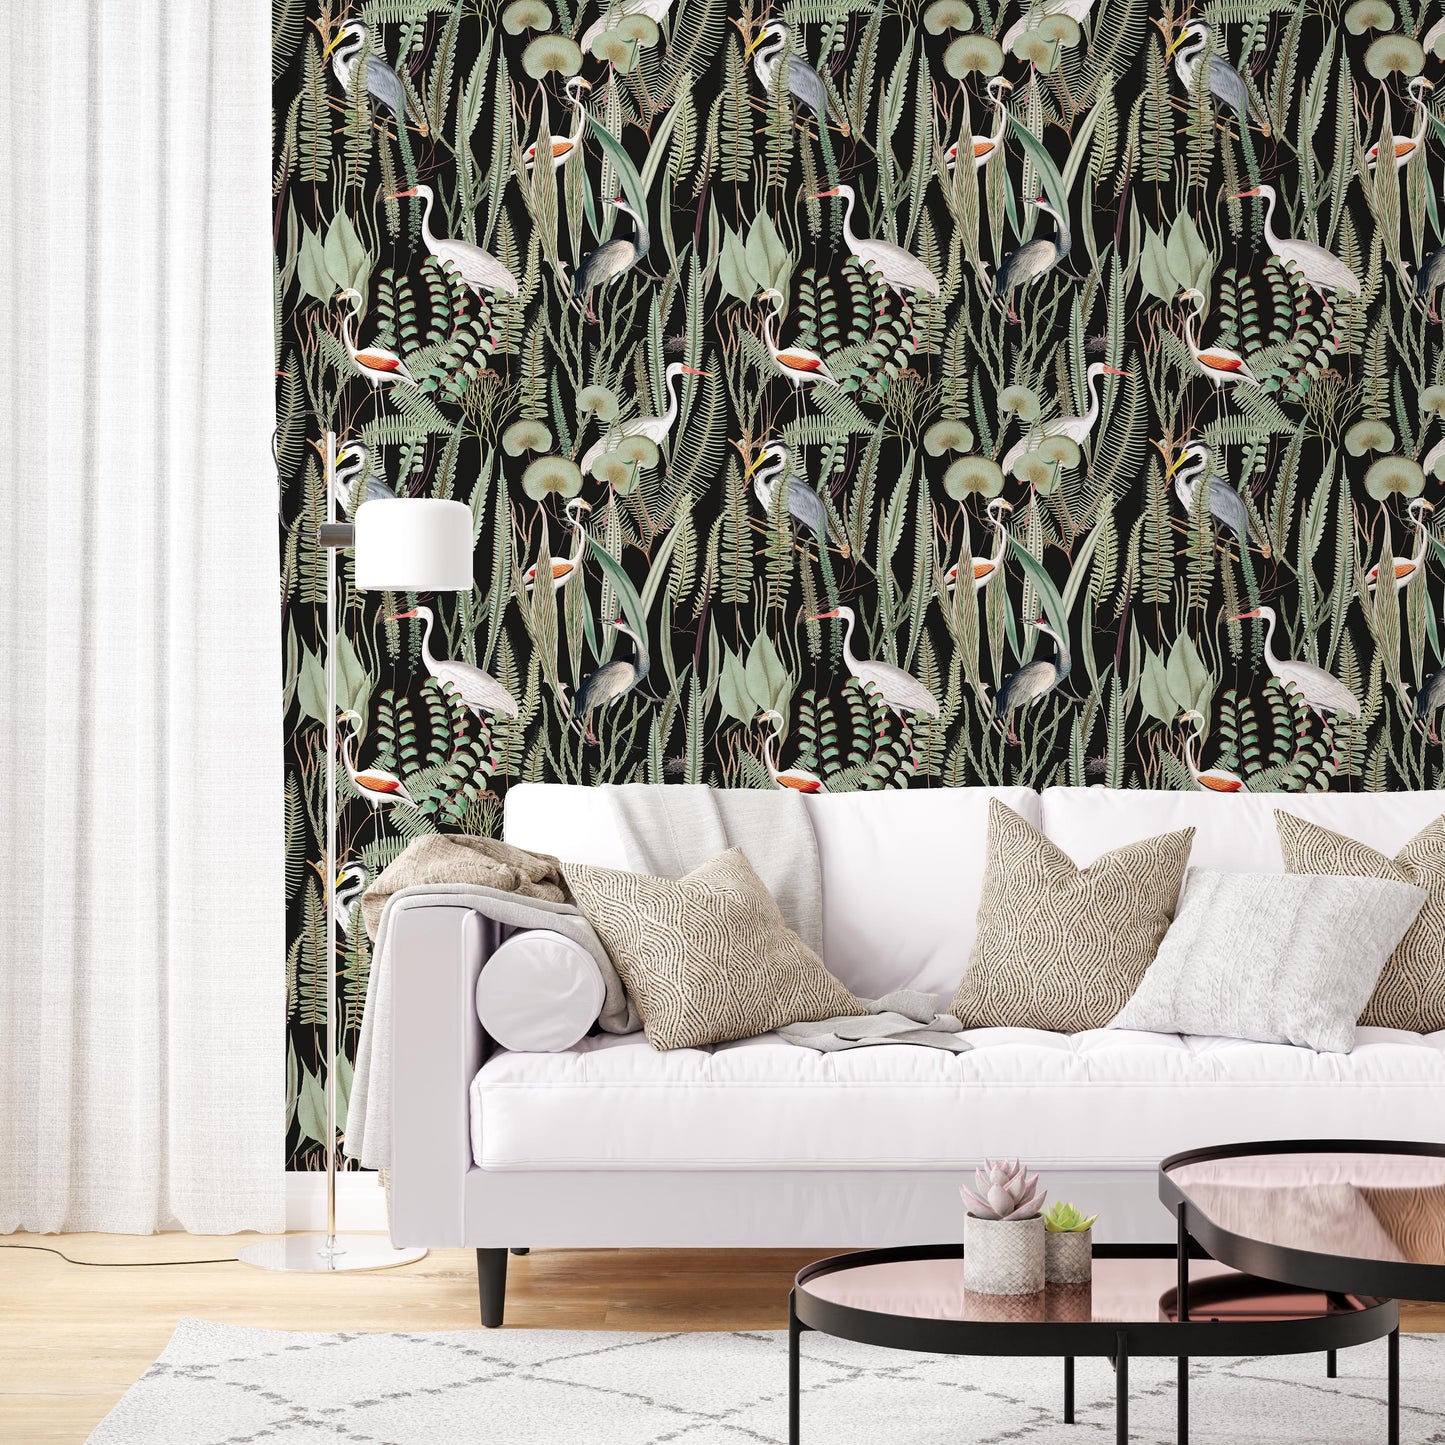 Elevate your living room with our striking black background heron and botanical wallpaper. The sophisticated black backdrop complements the crisp white couch and linen accents, creating a harmonious blend of elegance and comfort. The intricate floral patterns and majestic herons add a touch of visual intrigue, transforming your living room into a captivating centerpiece.